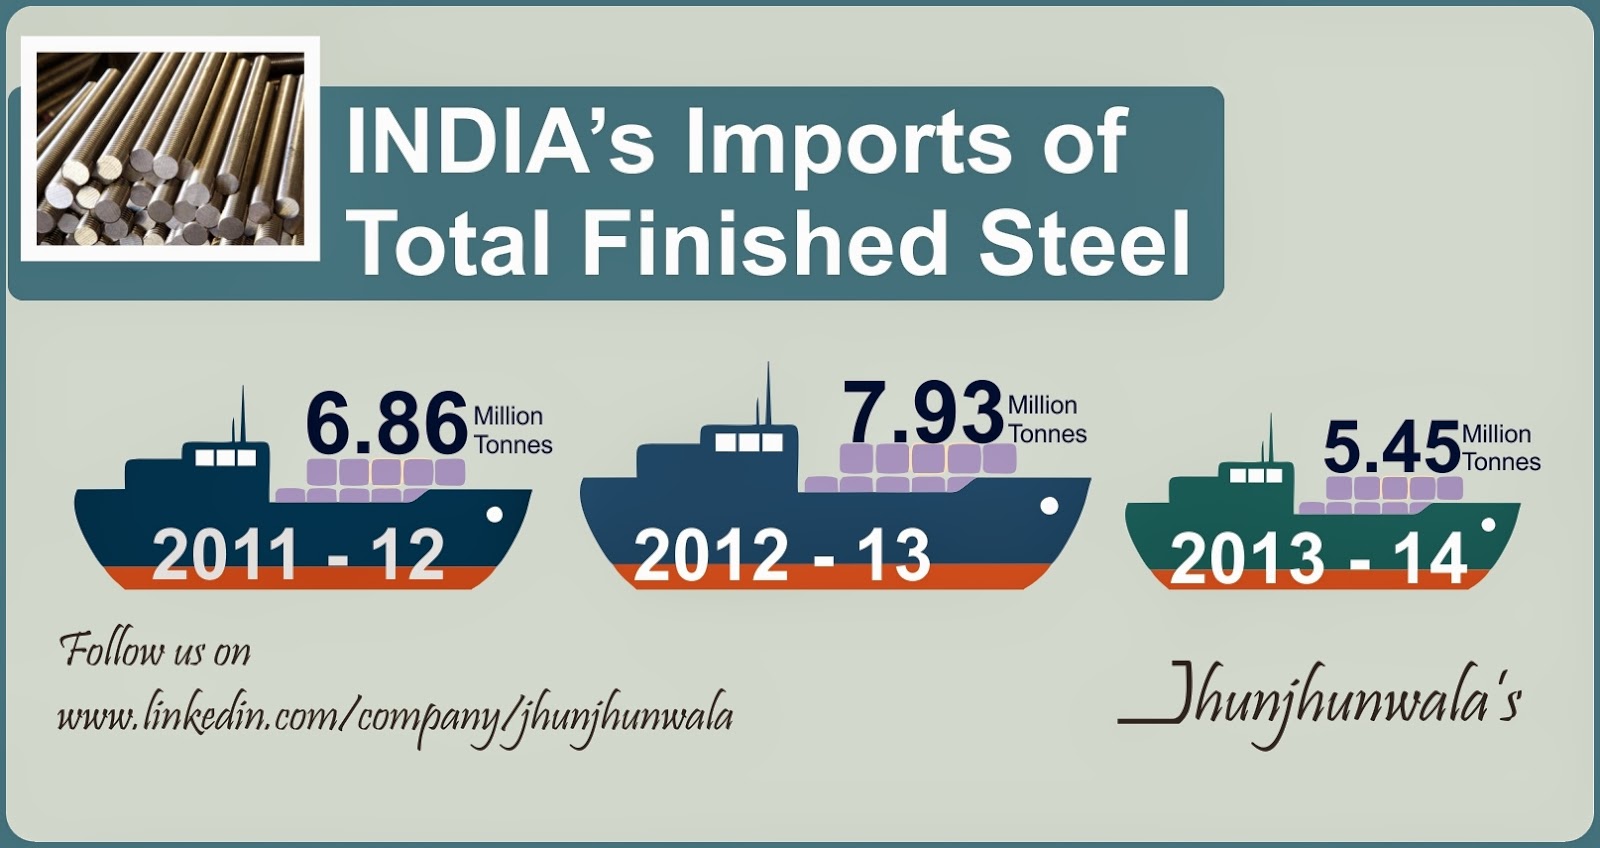 India's Import of Finished Steel for 2011 to 2014